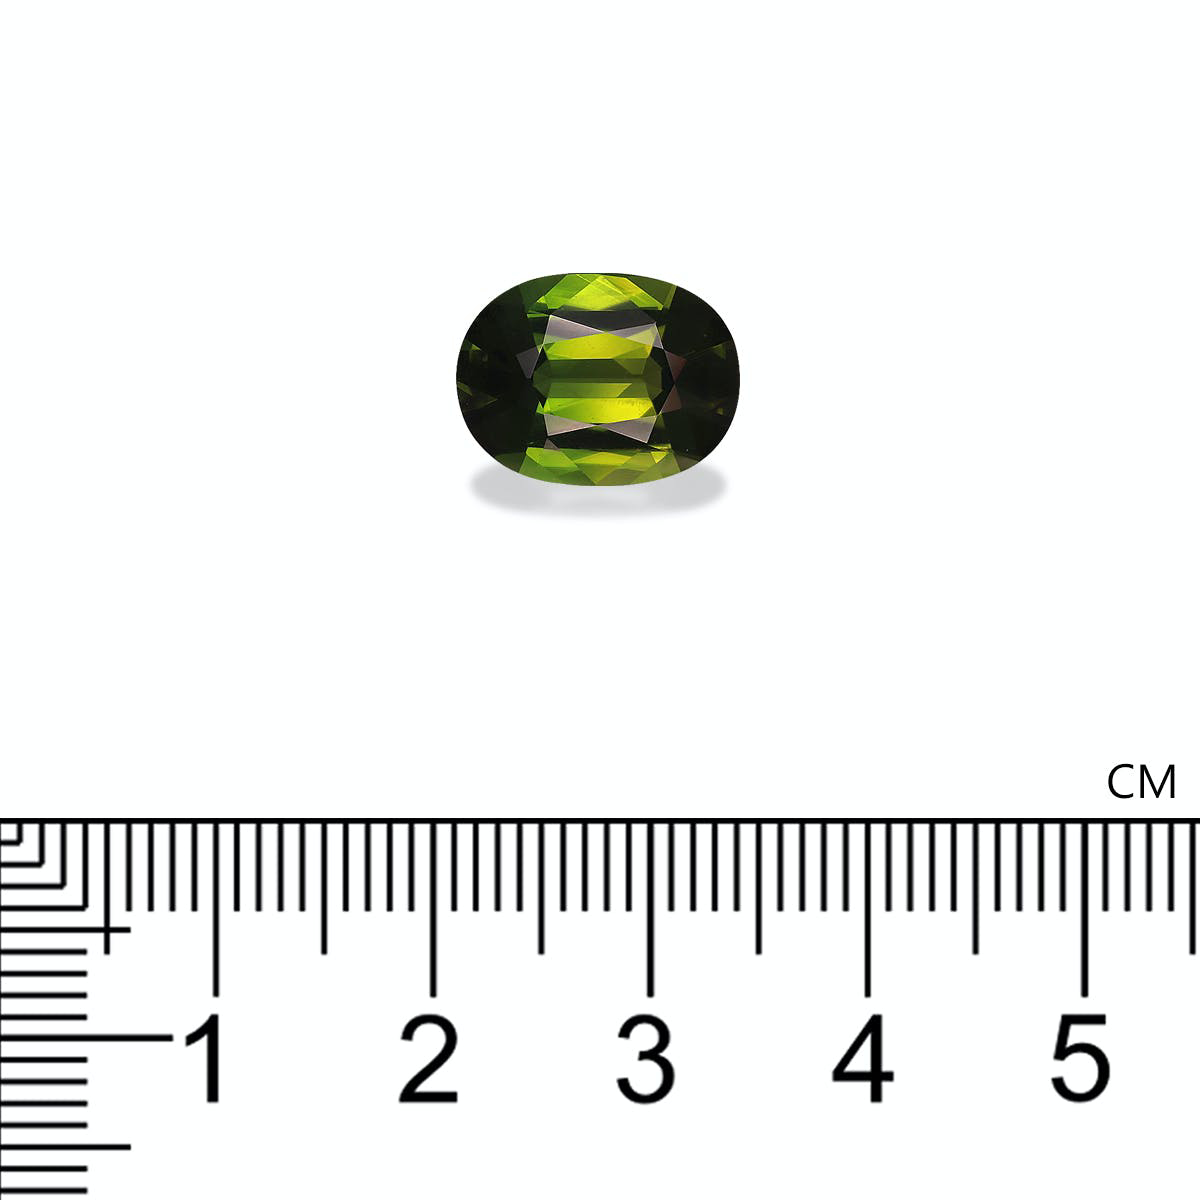 Picture of Basil Green Chrome Tourmaline 4.44ct (CT0201)